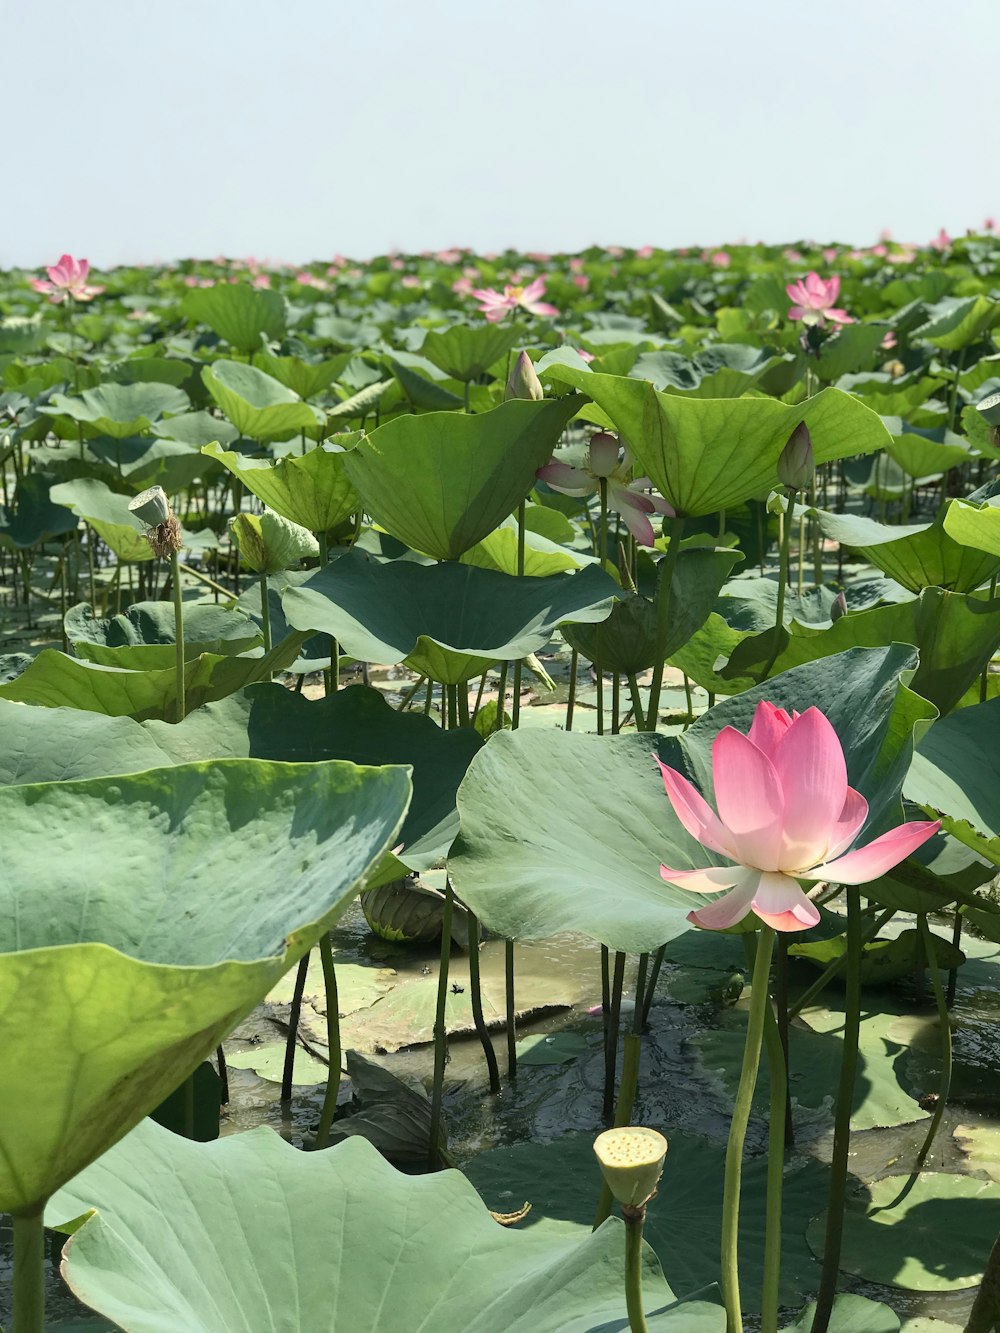 a large field of water lilies with green leaves